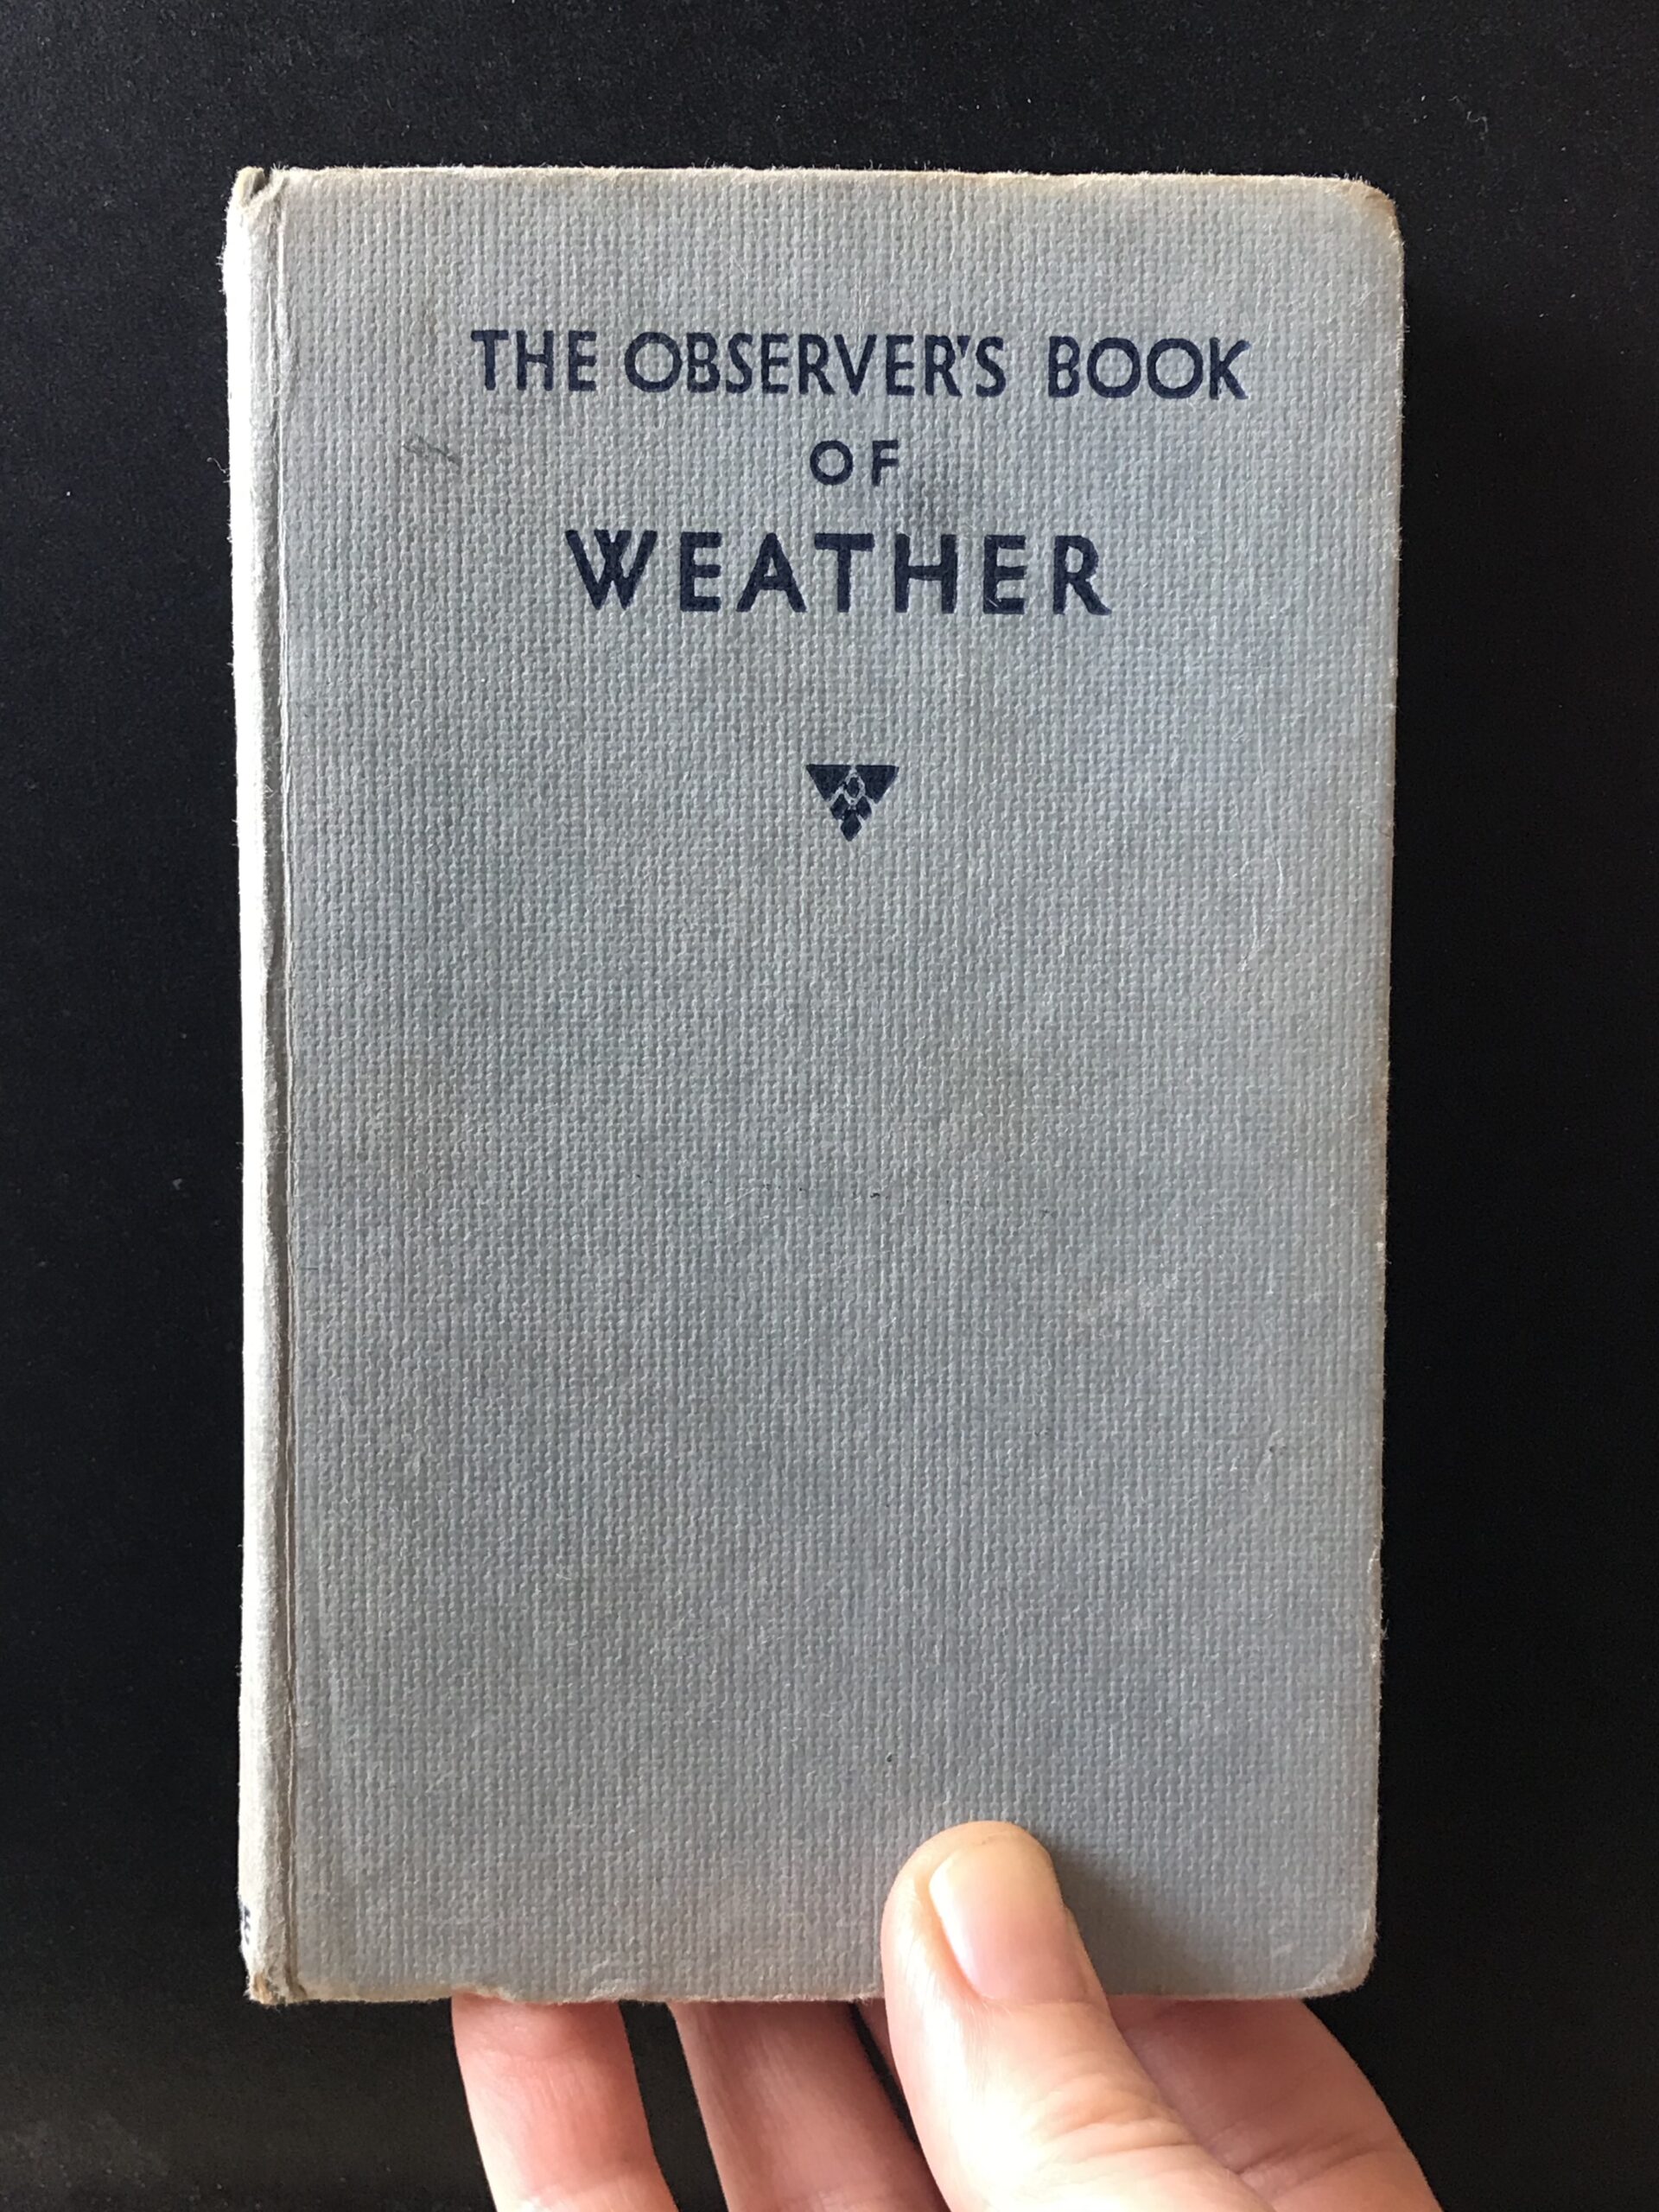 Through a glass, darkly: Hand holding The Observer Book of Weather